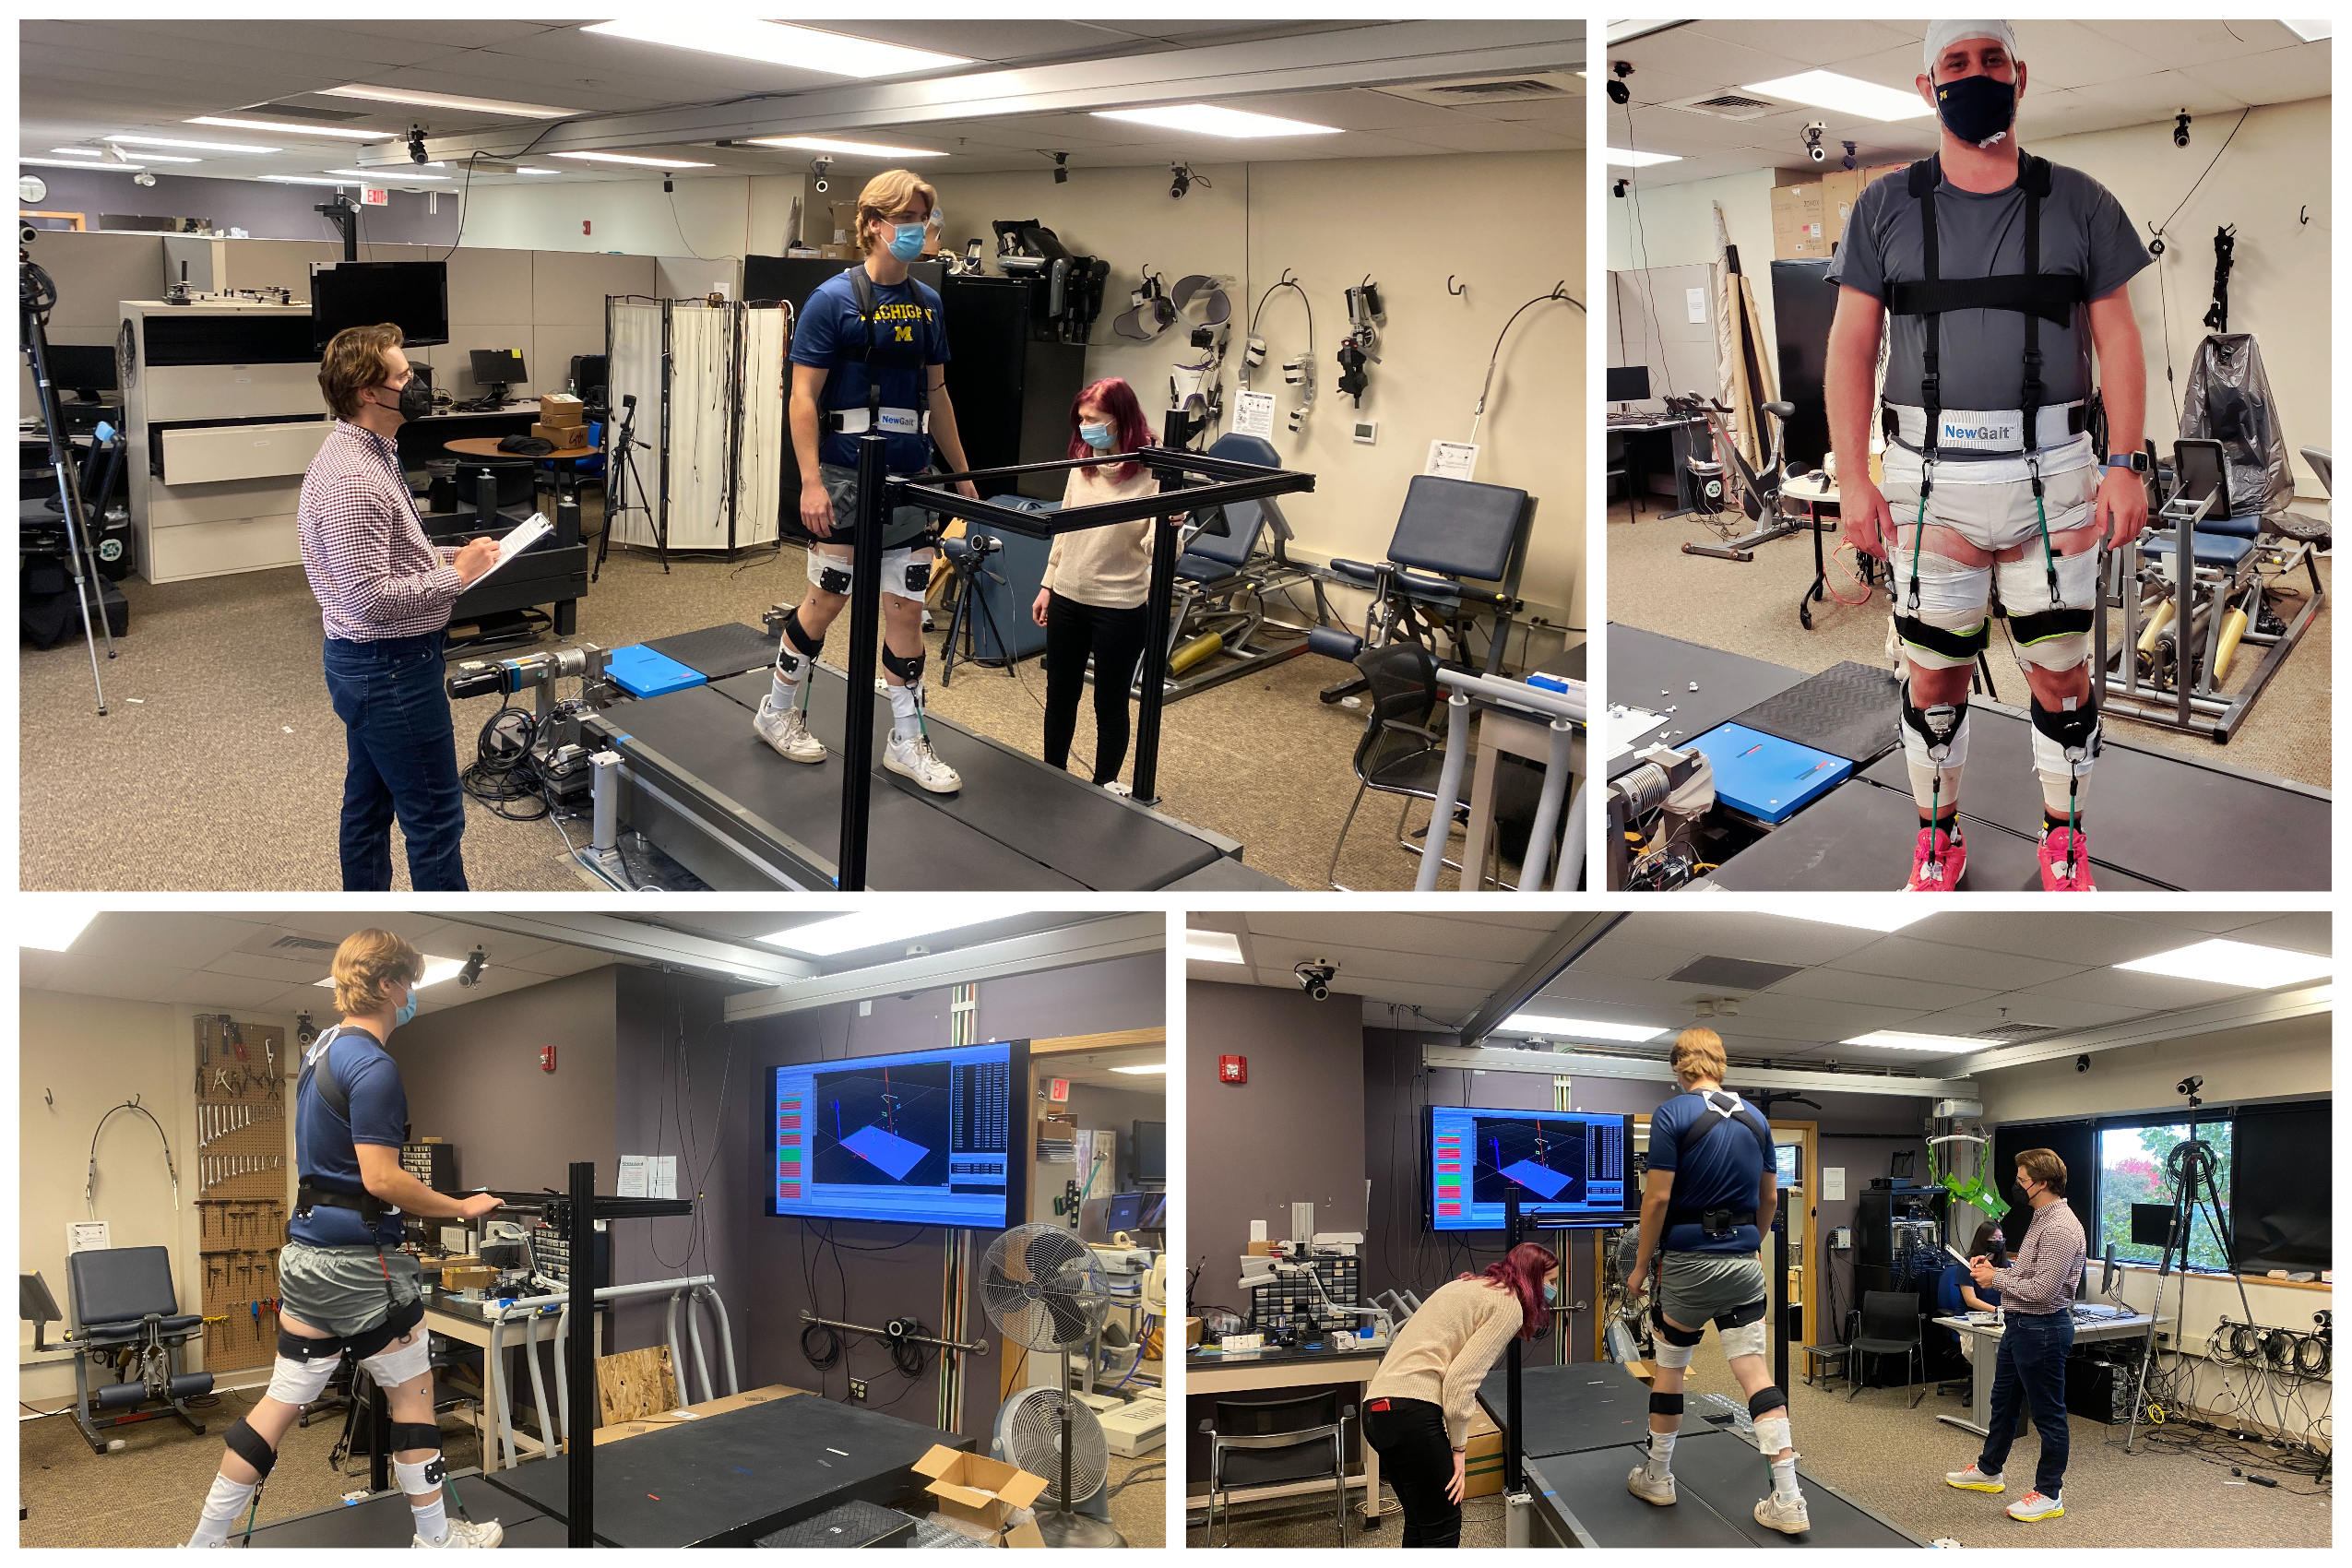 Collage of photos featuring the NewGait device being developed and studied by researchers at The University of Michigan